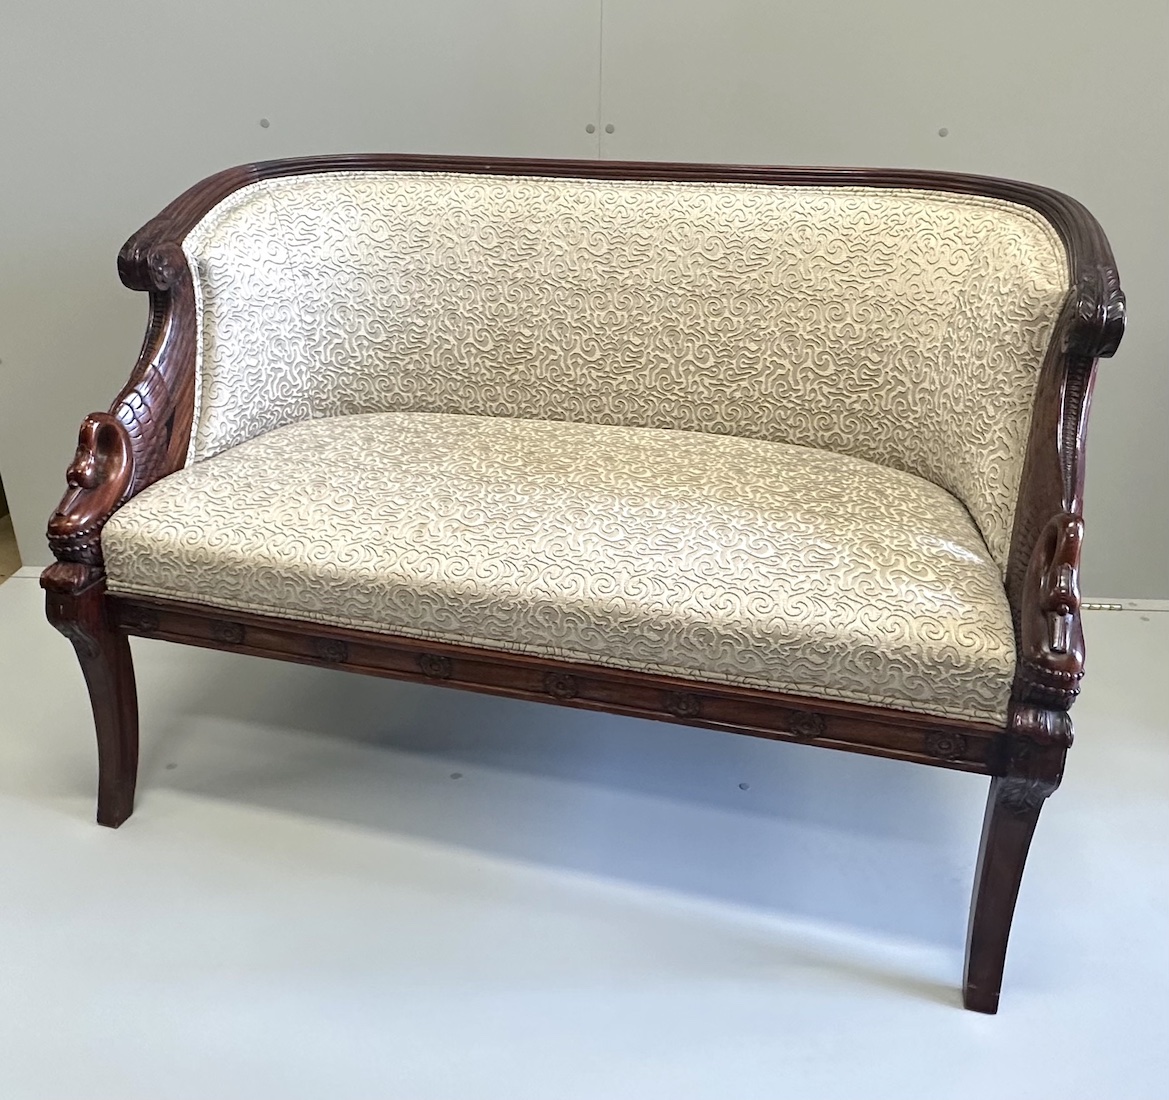 A small Regency style mahogany settee, the reeded frame with swans heads end scrolls, width 125cm, depth 64cm, height 85cm